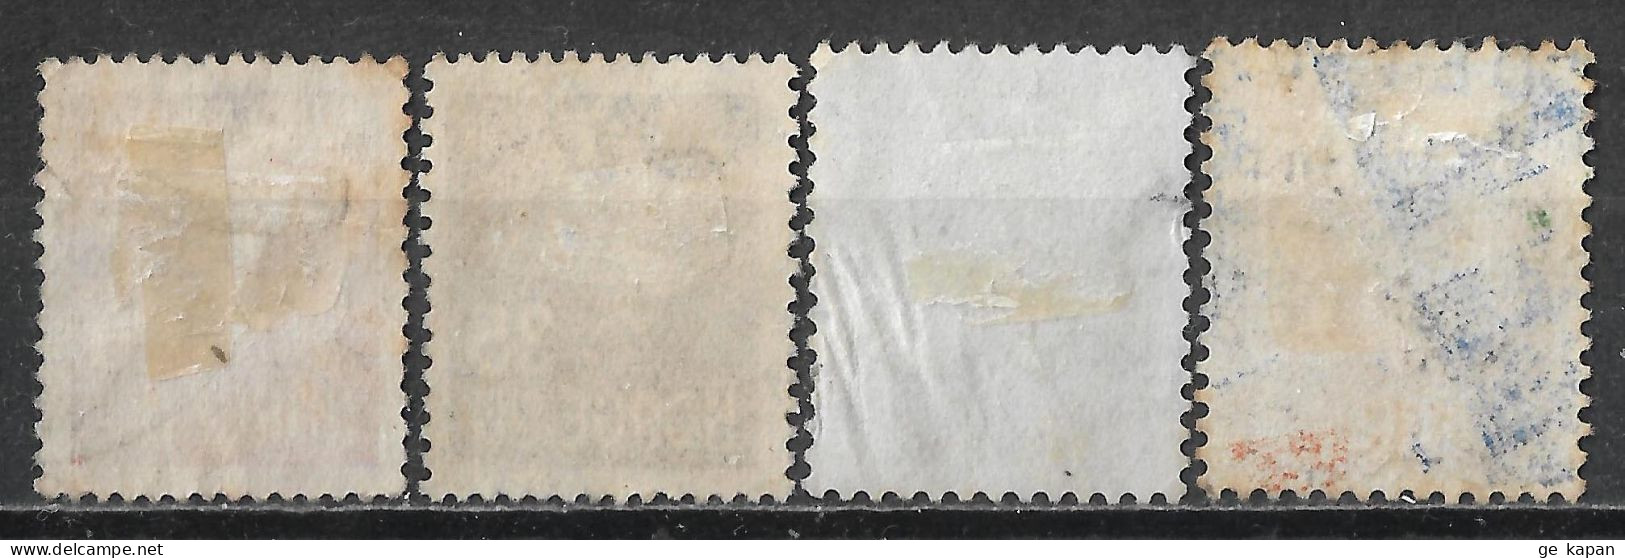 1927-1946 NORWAY SET OF 4 USED STAMPS (Michel # 124A,128A,220,321) - Oblitérés